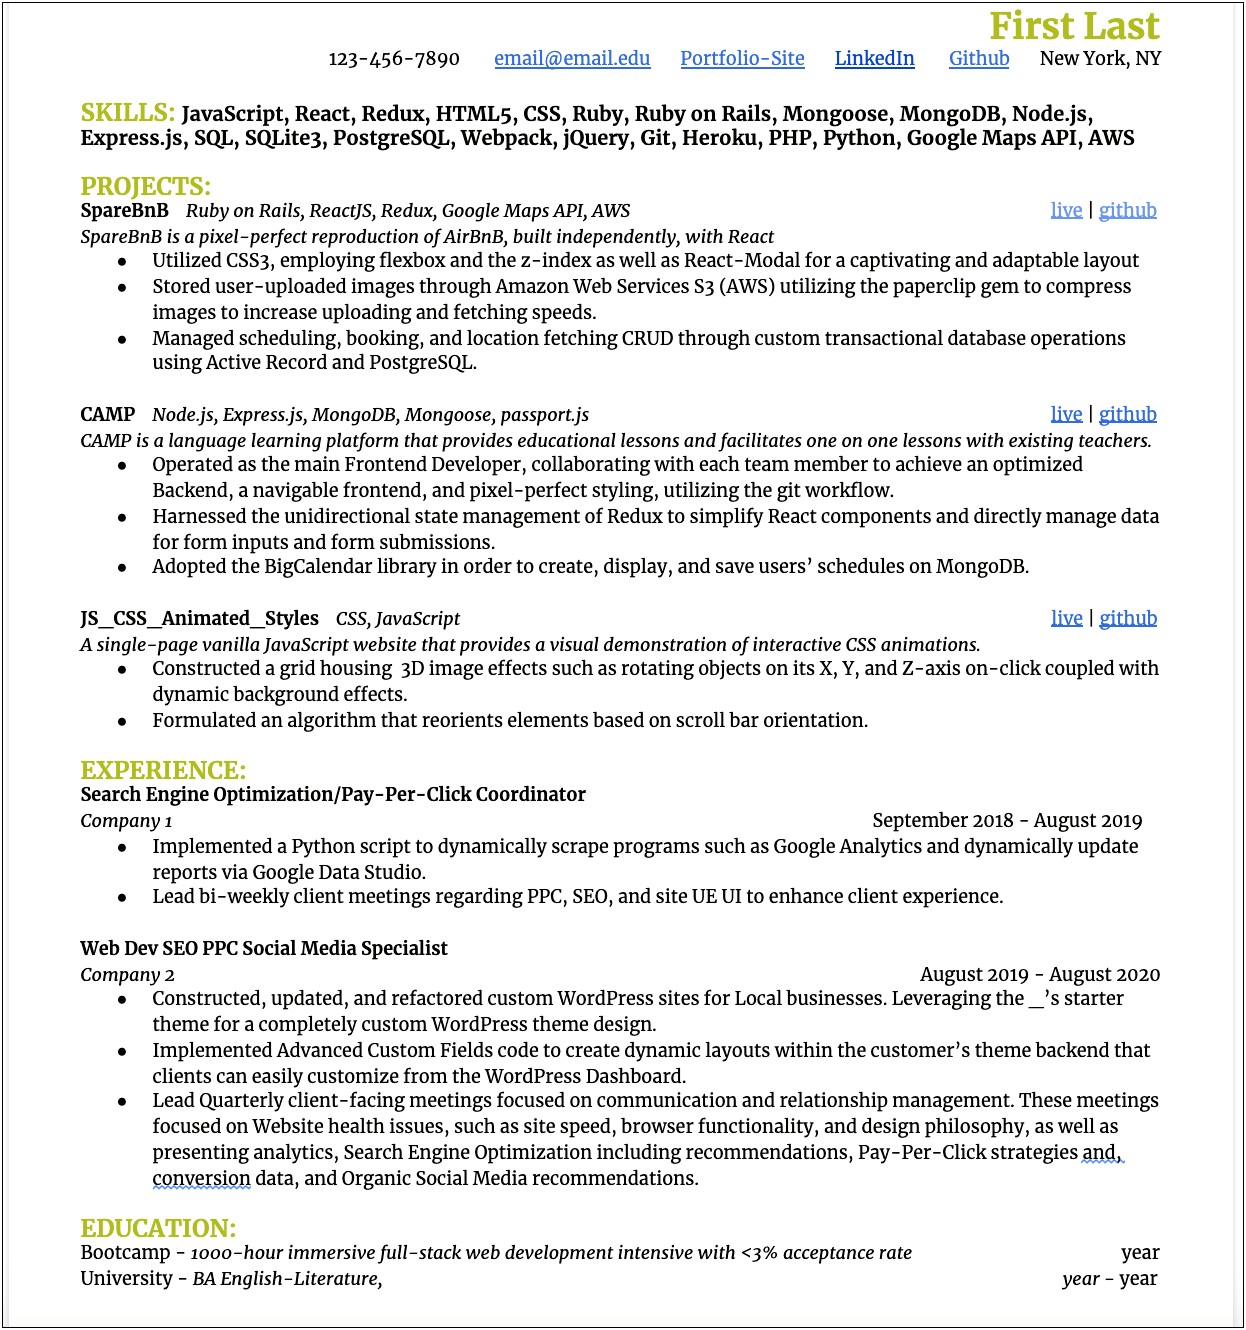 Resume Summary For Coding Bootcamp Grads